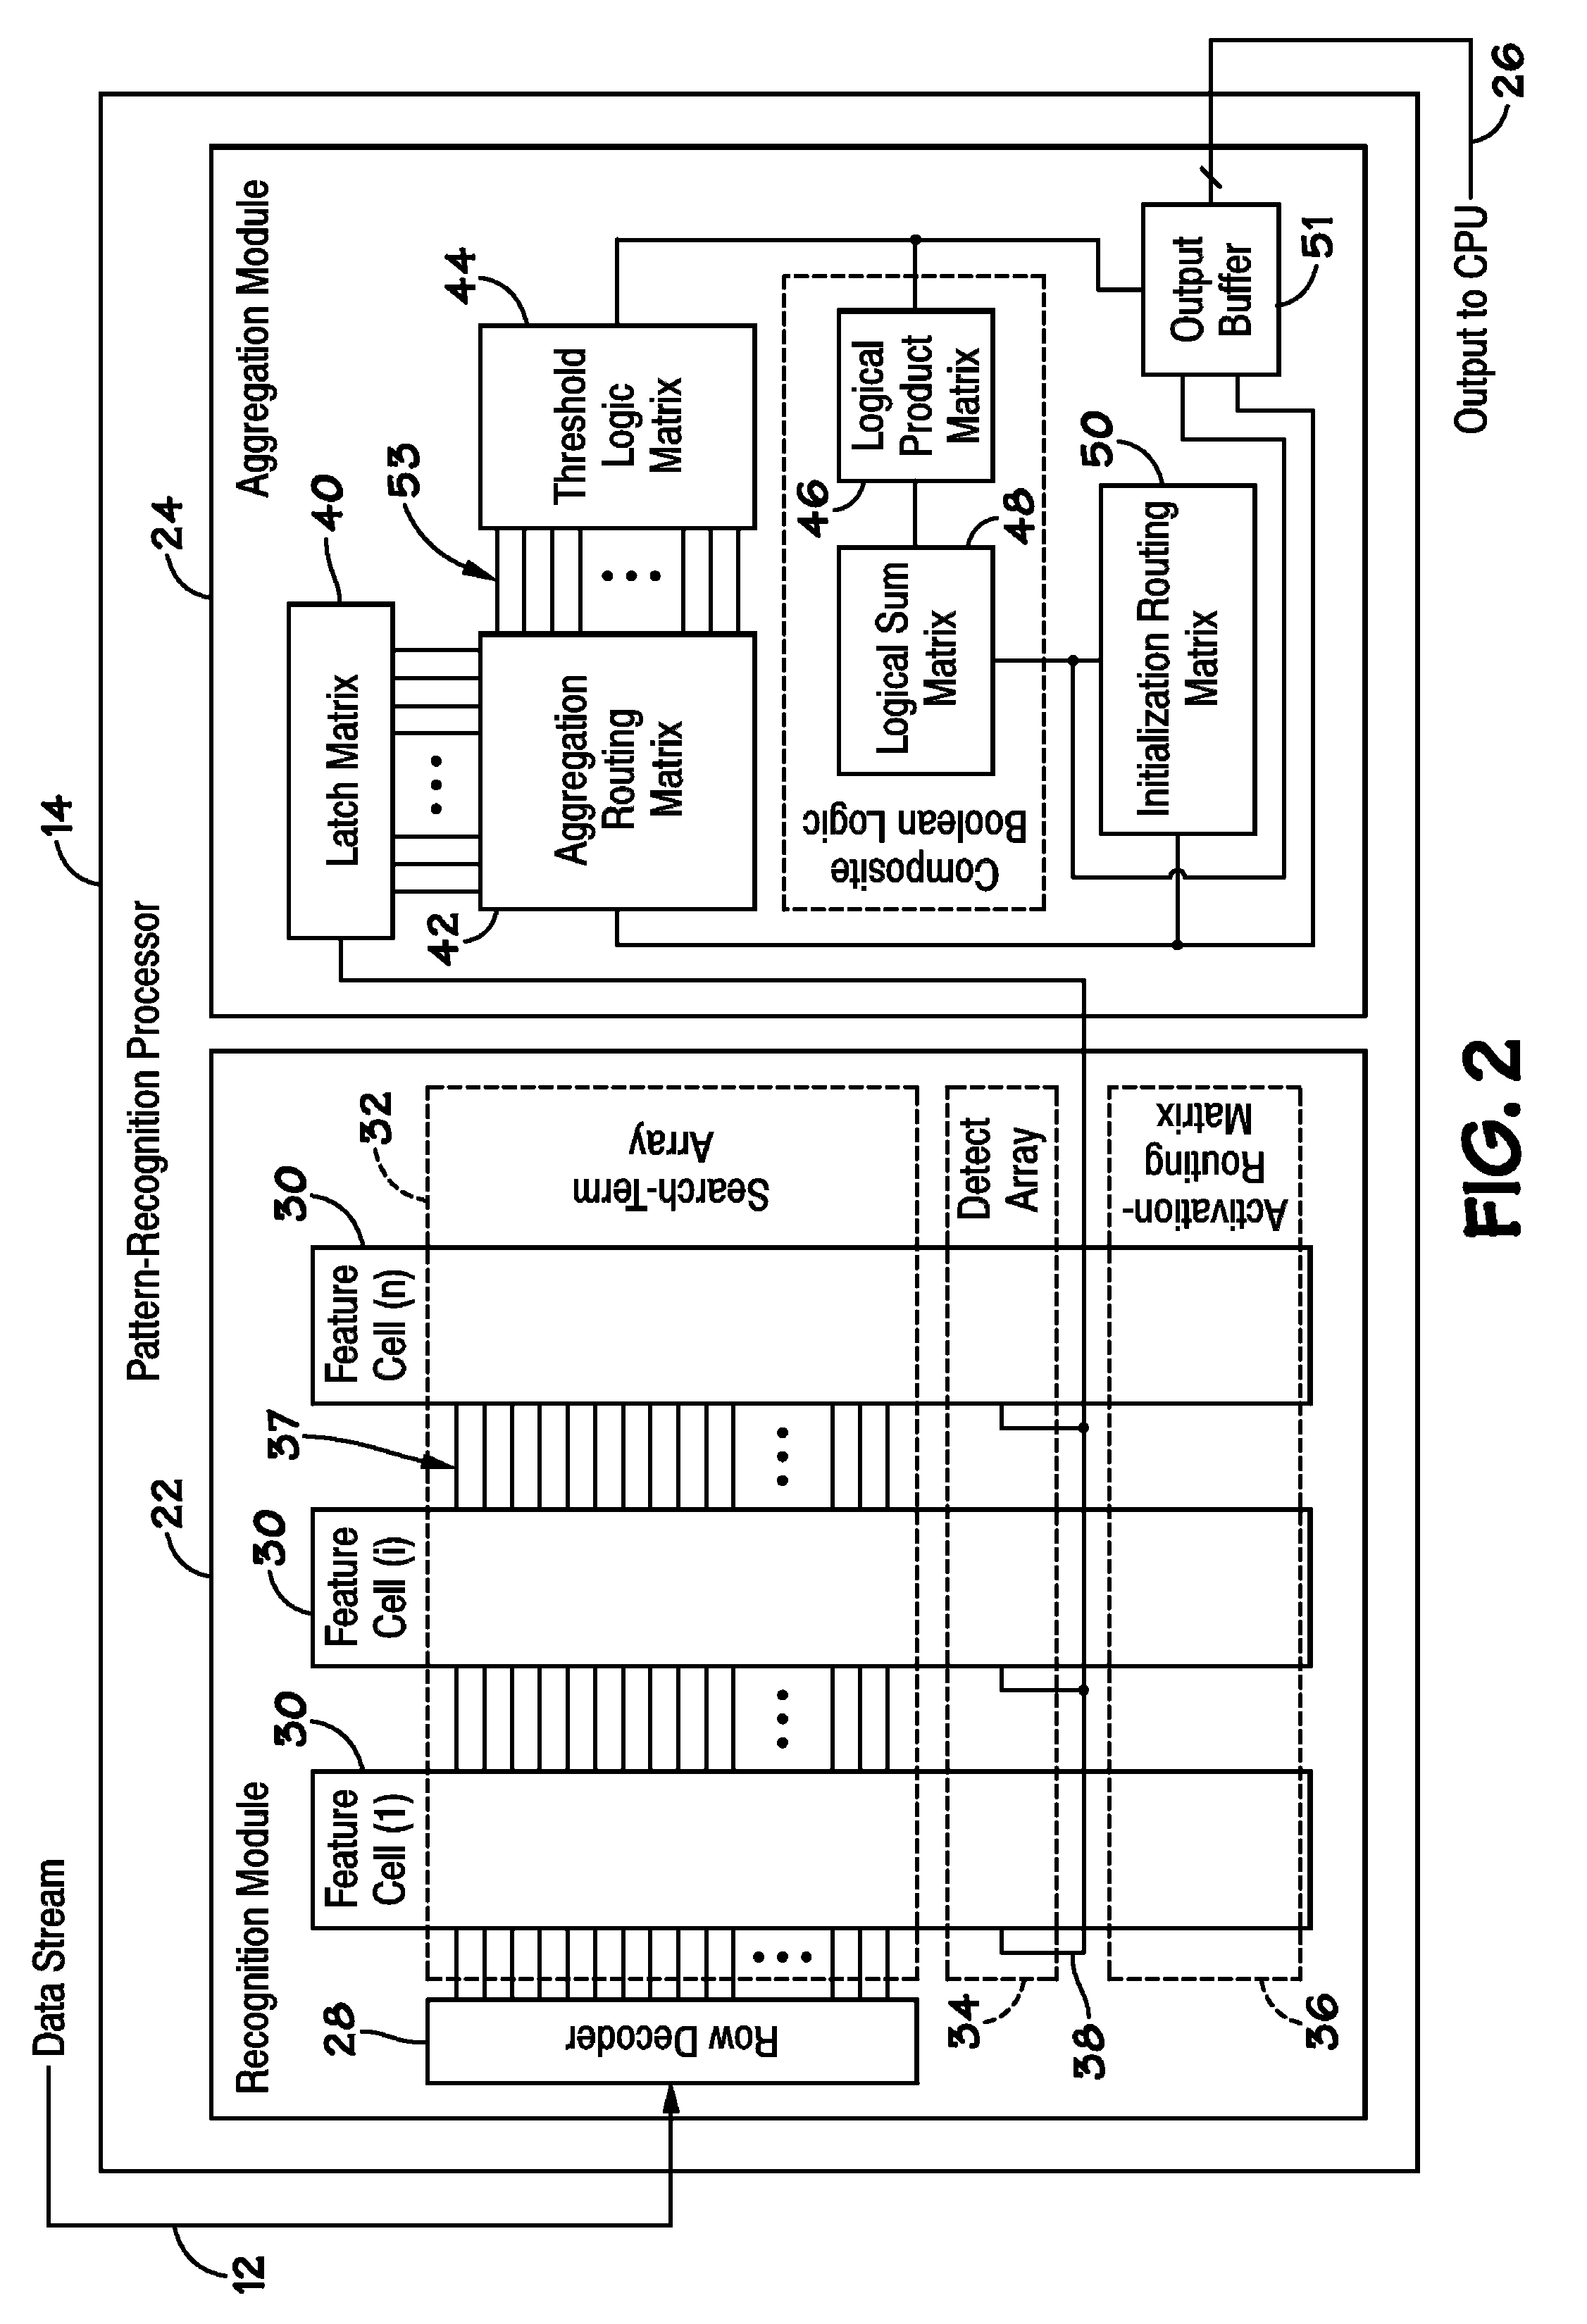 Methods and systems to accomplish variable width data input